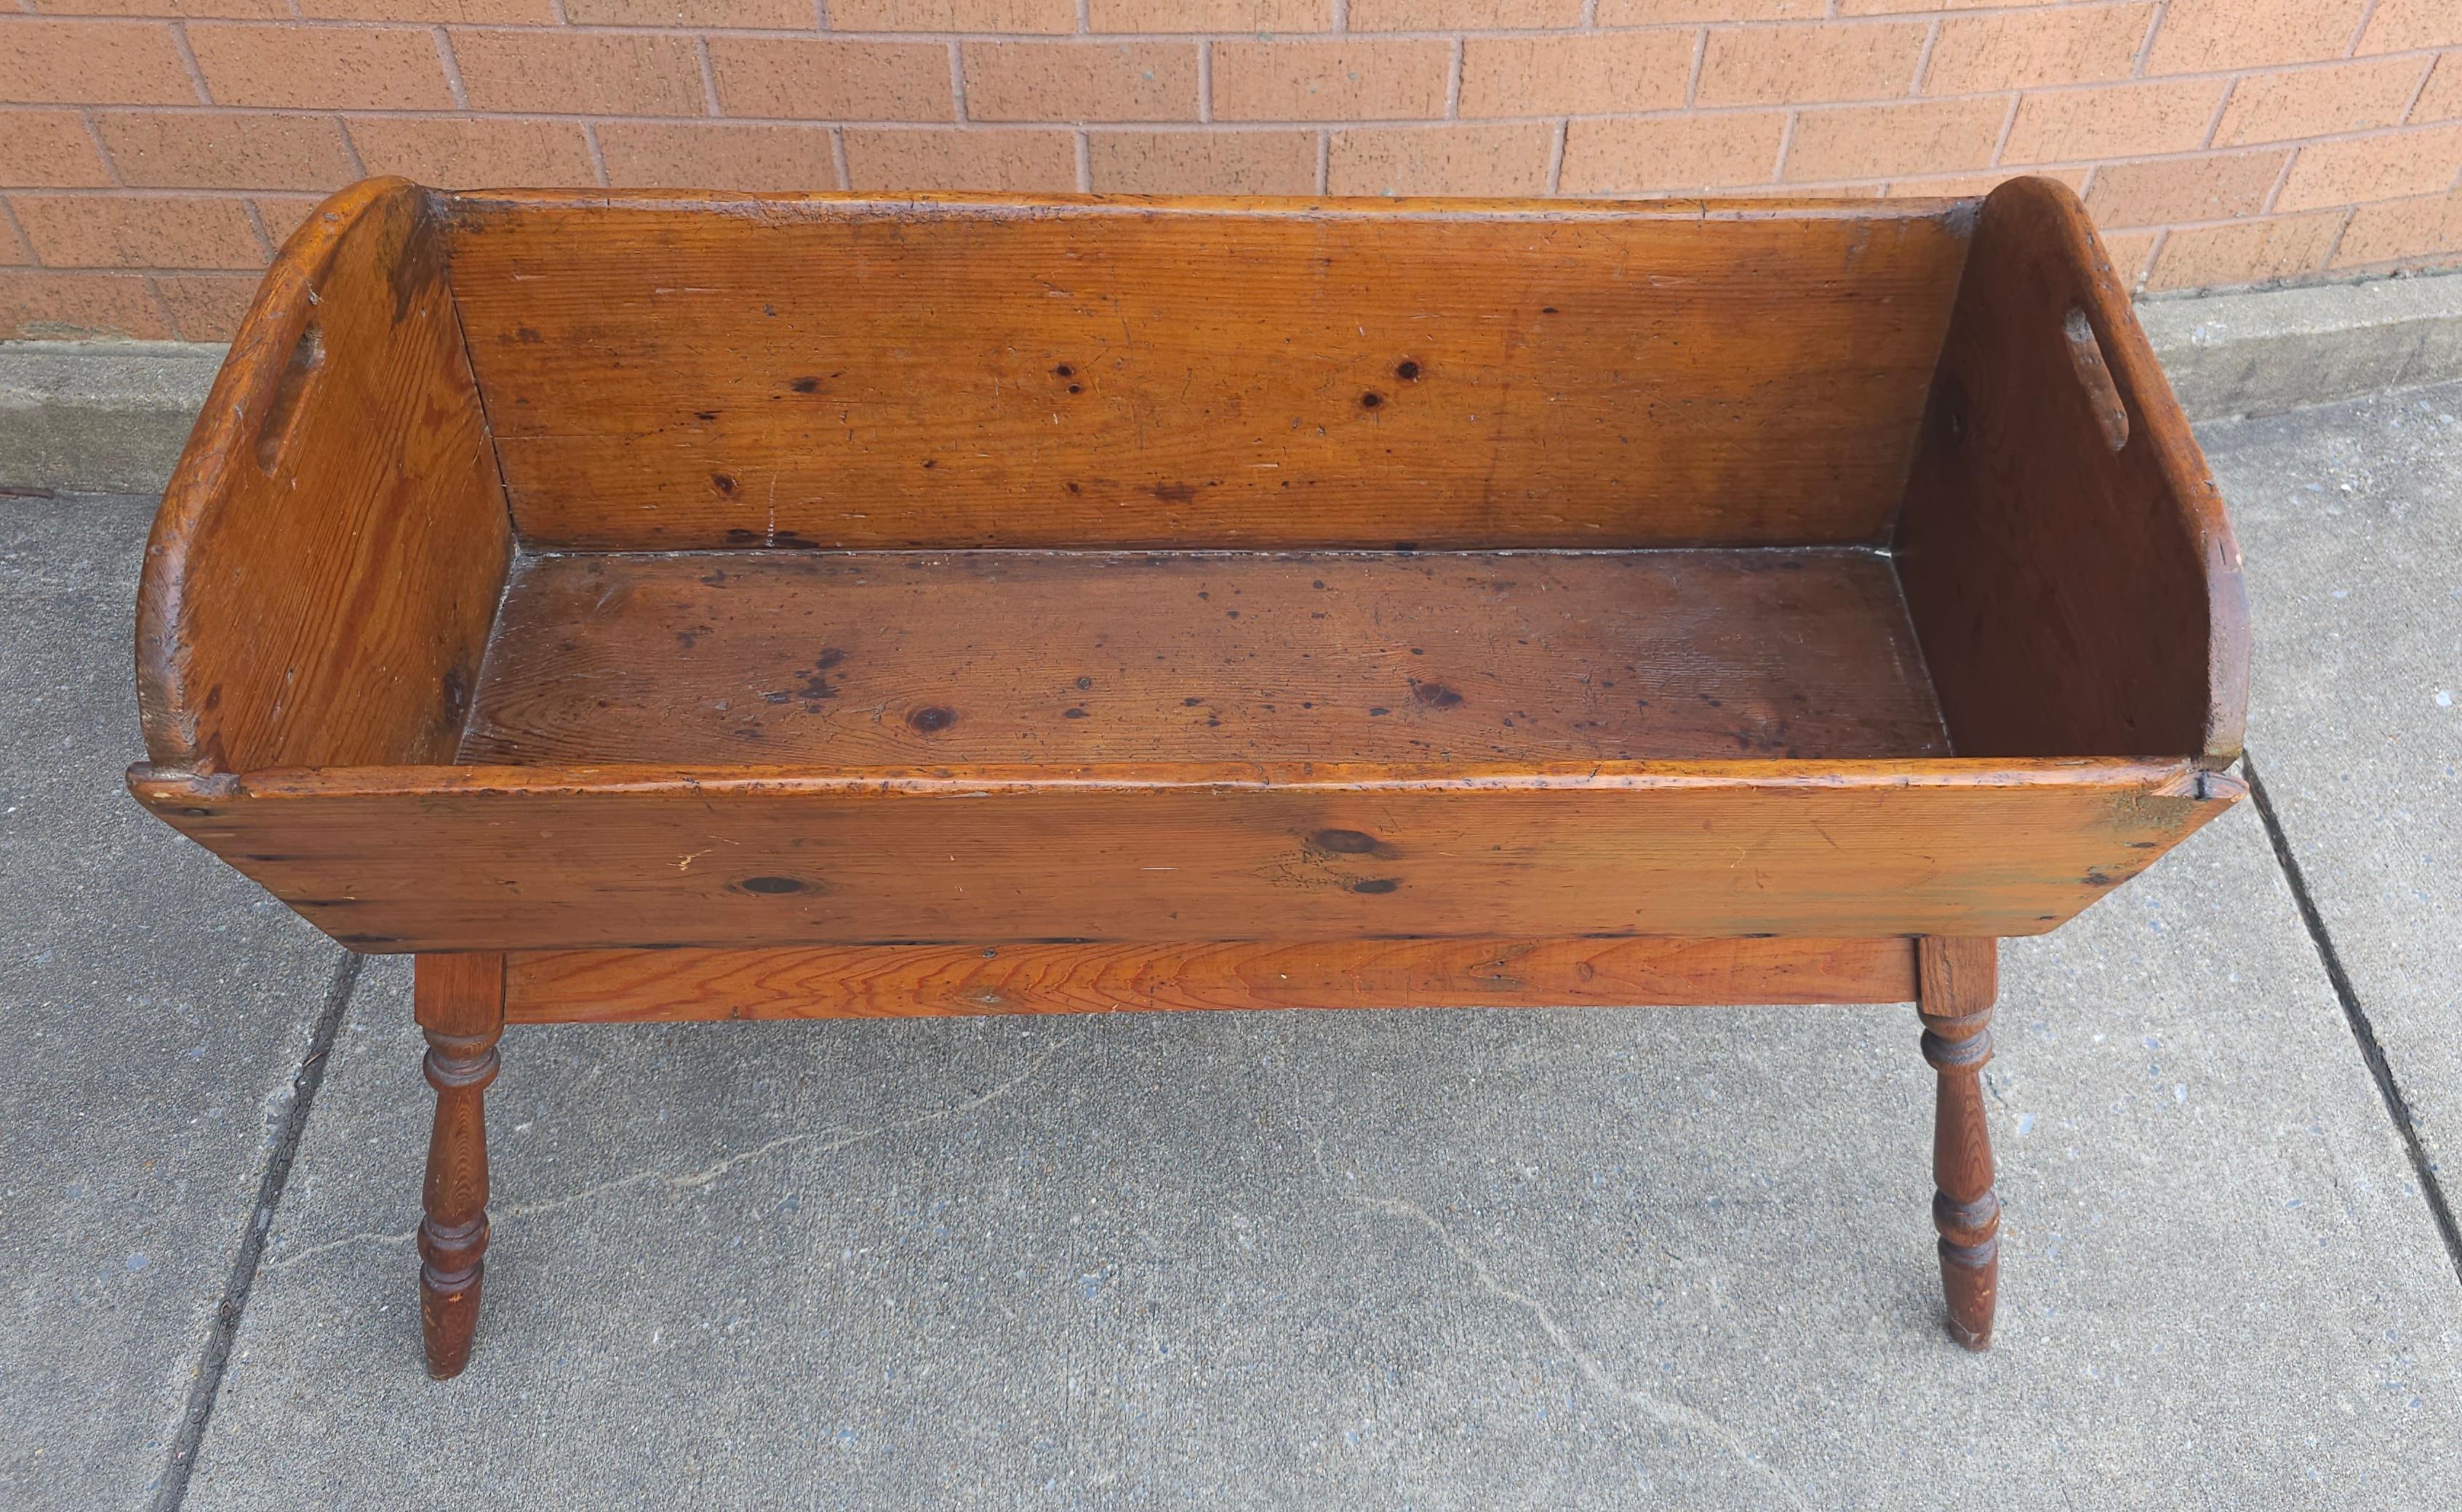 Hand-Crafted 19th Century Pennsylvania Pine Dough Trough / Flower Bed Planter on Stand For Sale